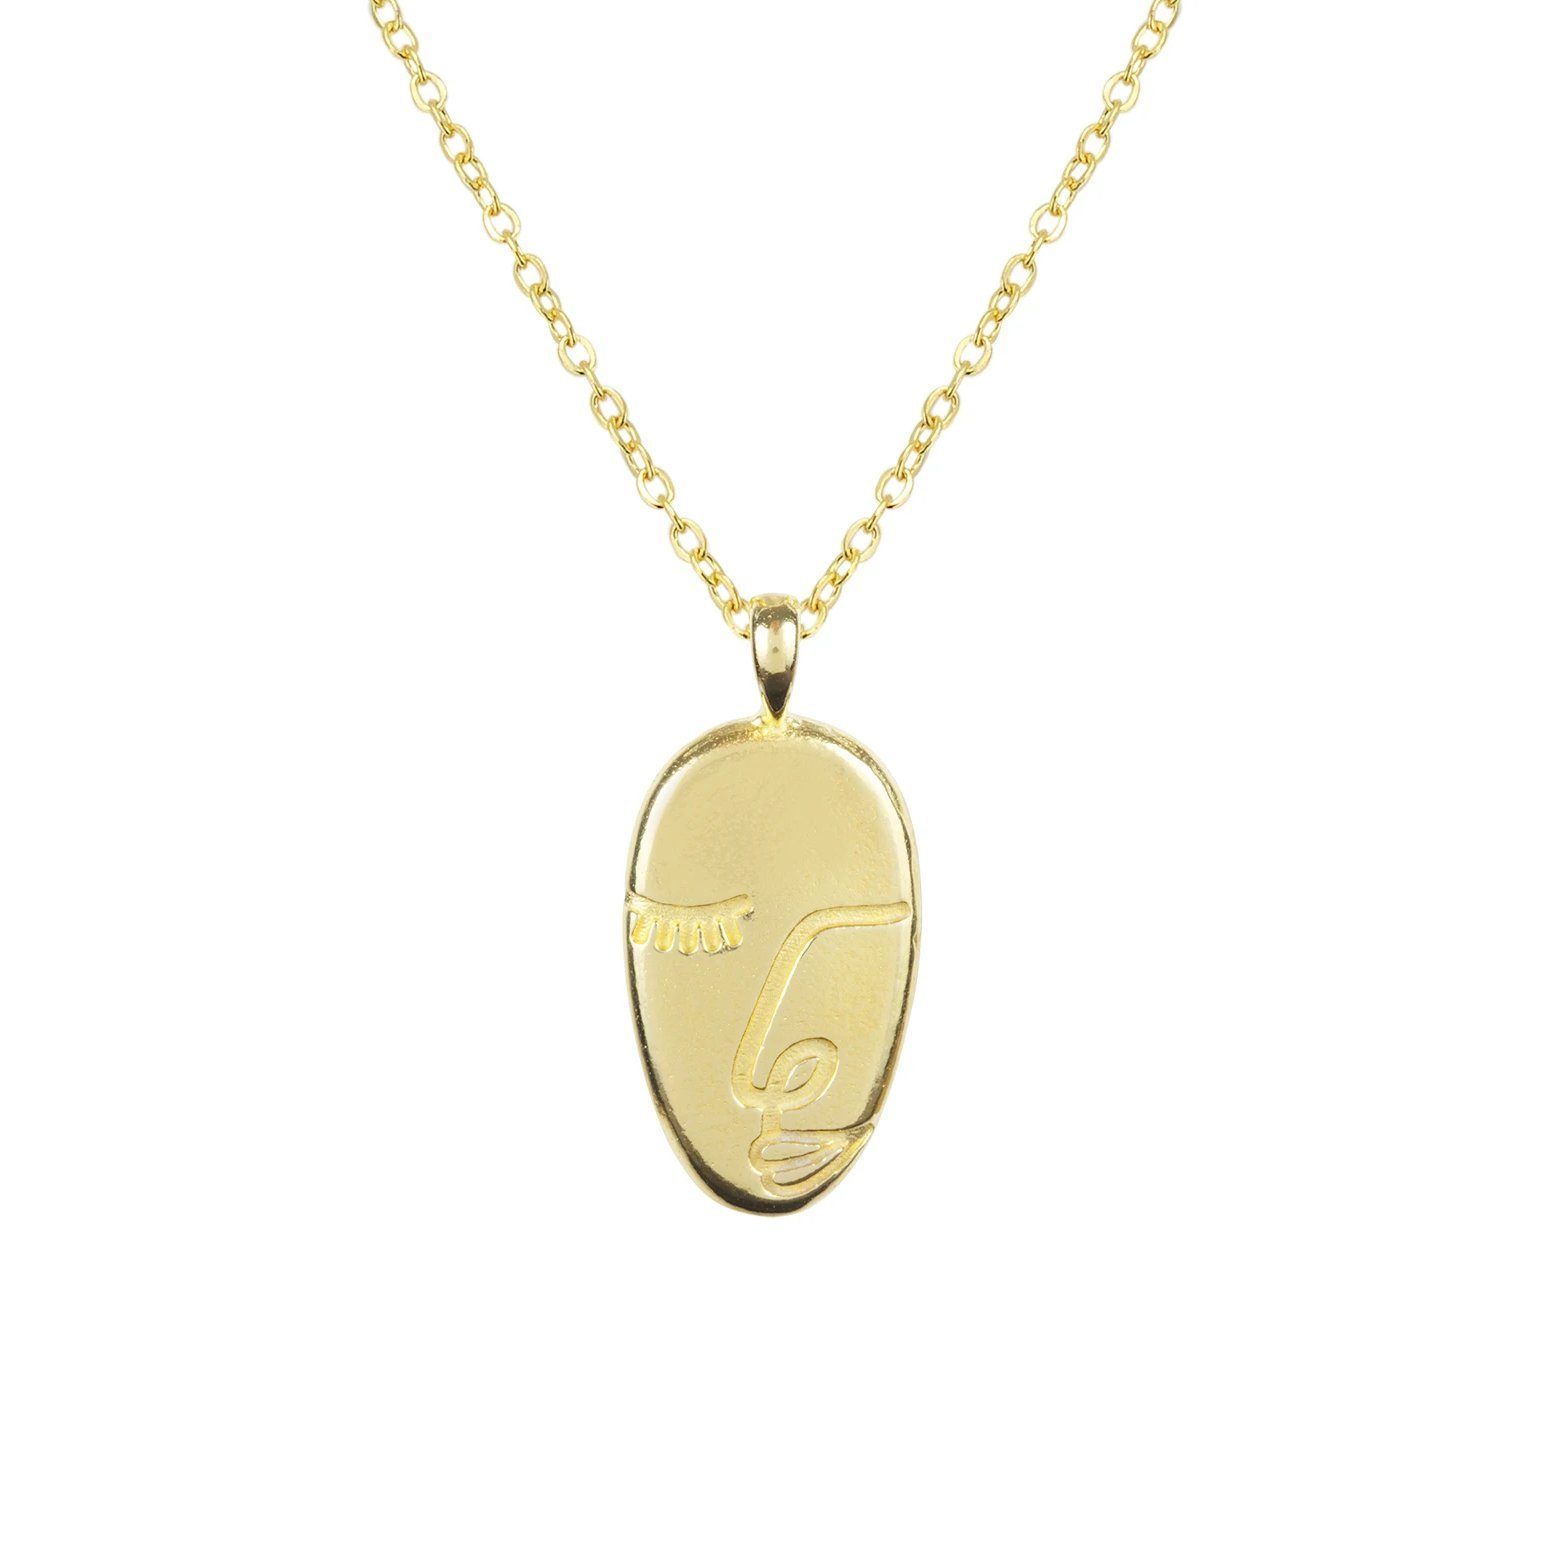 Gold and dainty Artist Face Necklace against a white background